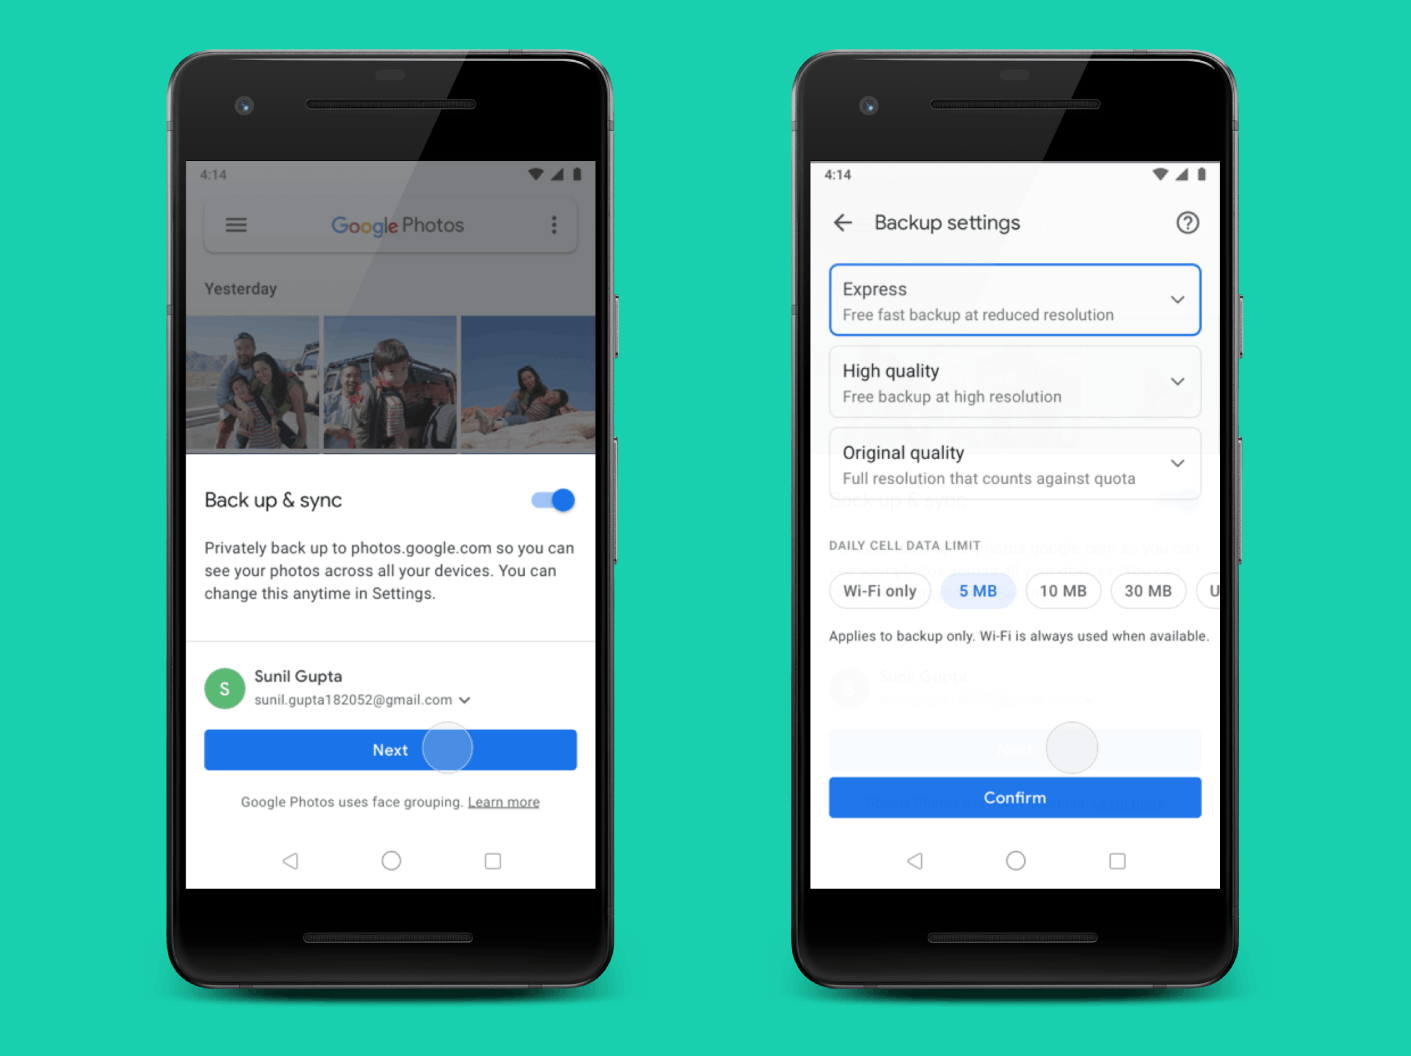 Google Photos is getting Express backups and various data cap features